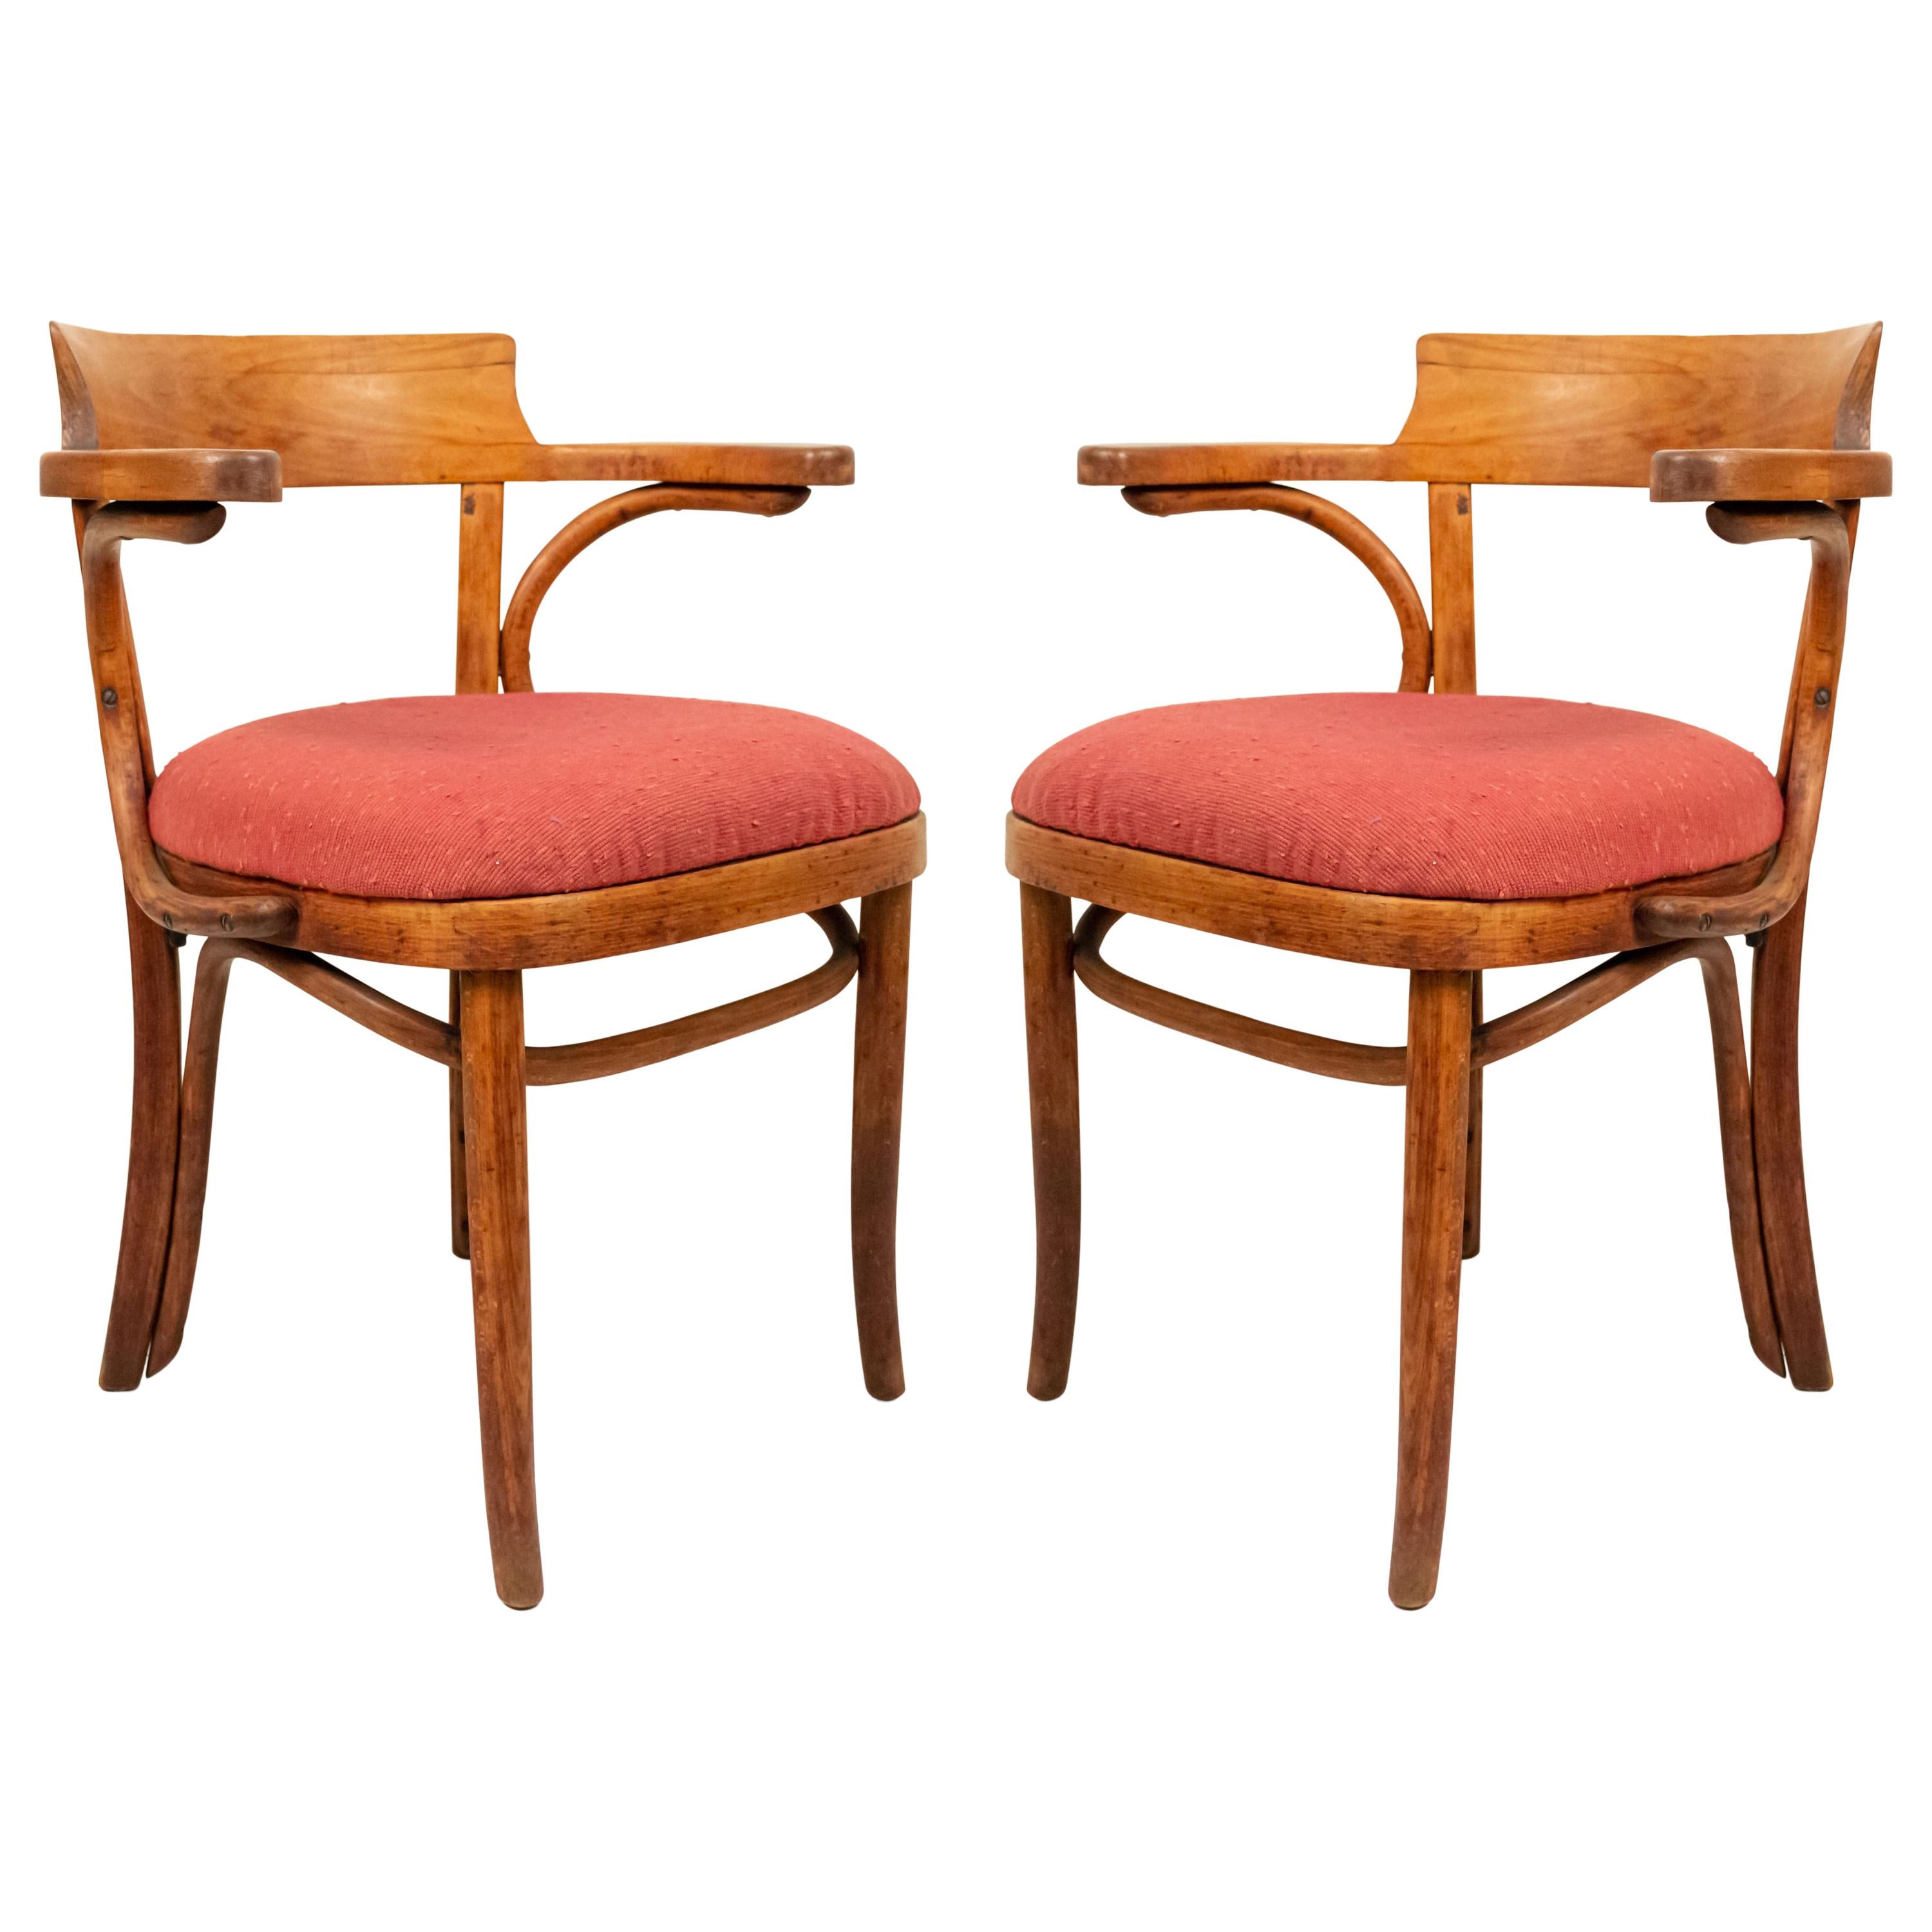 Bentwood Pine and Poplar Captains Chairs